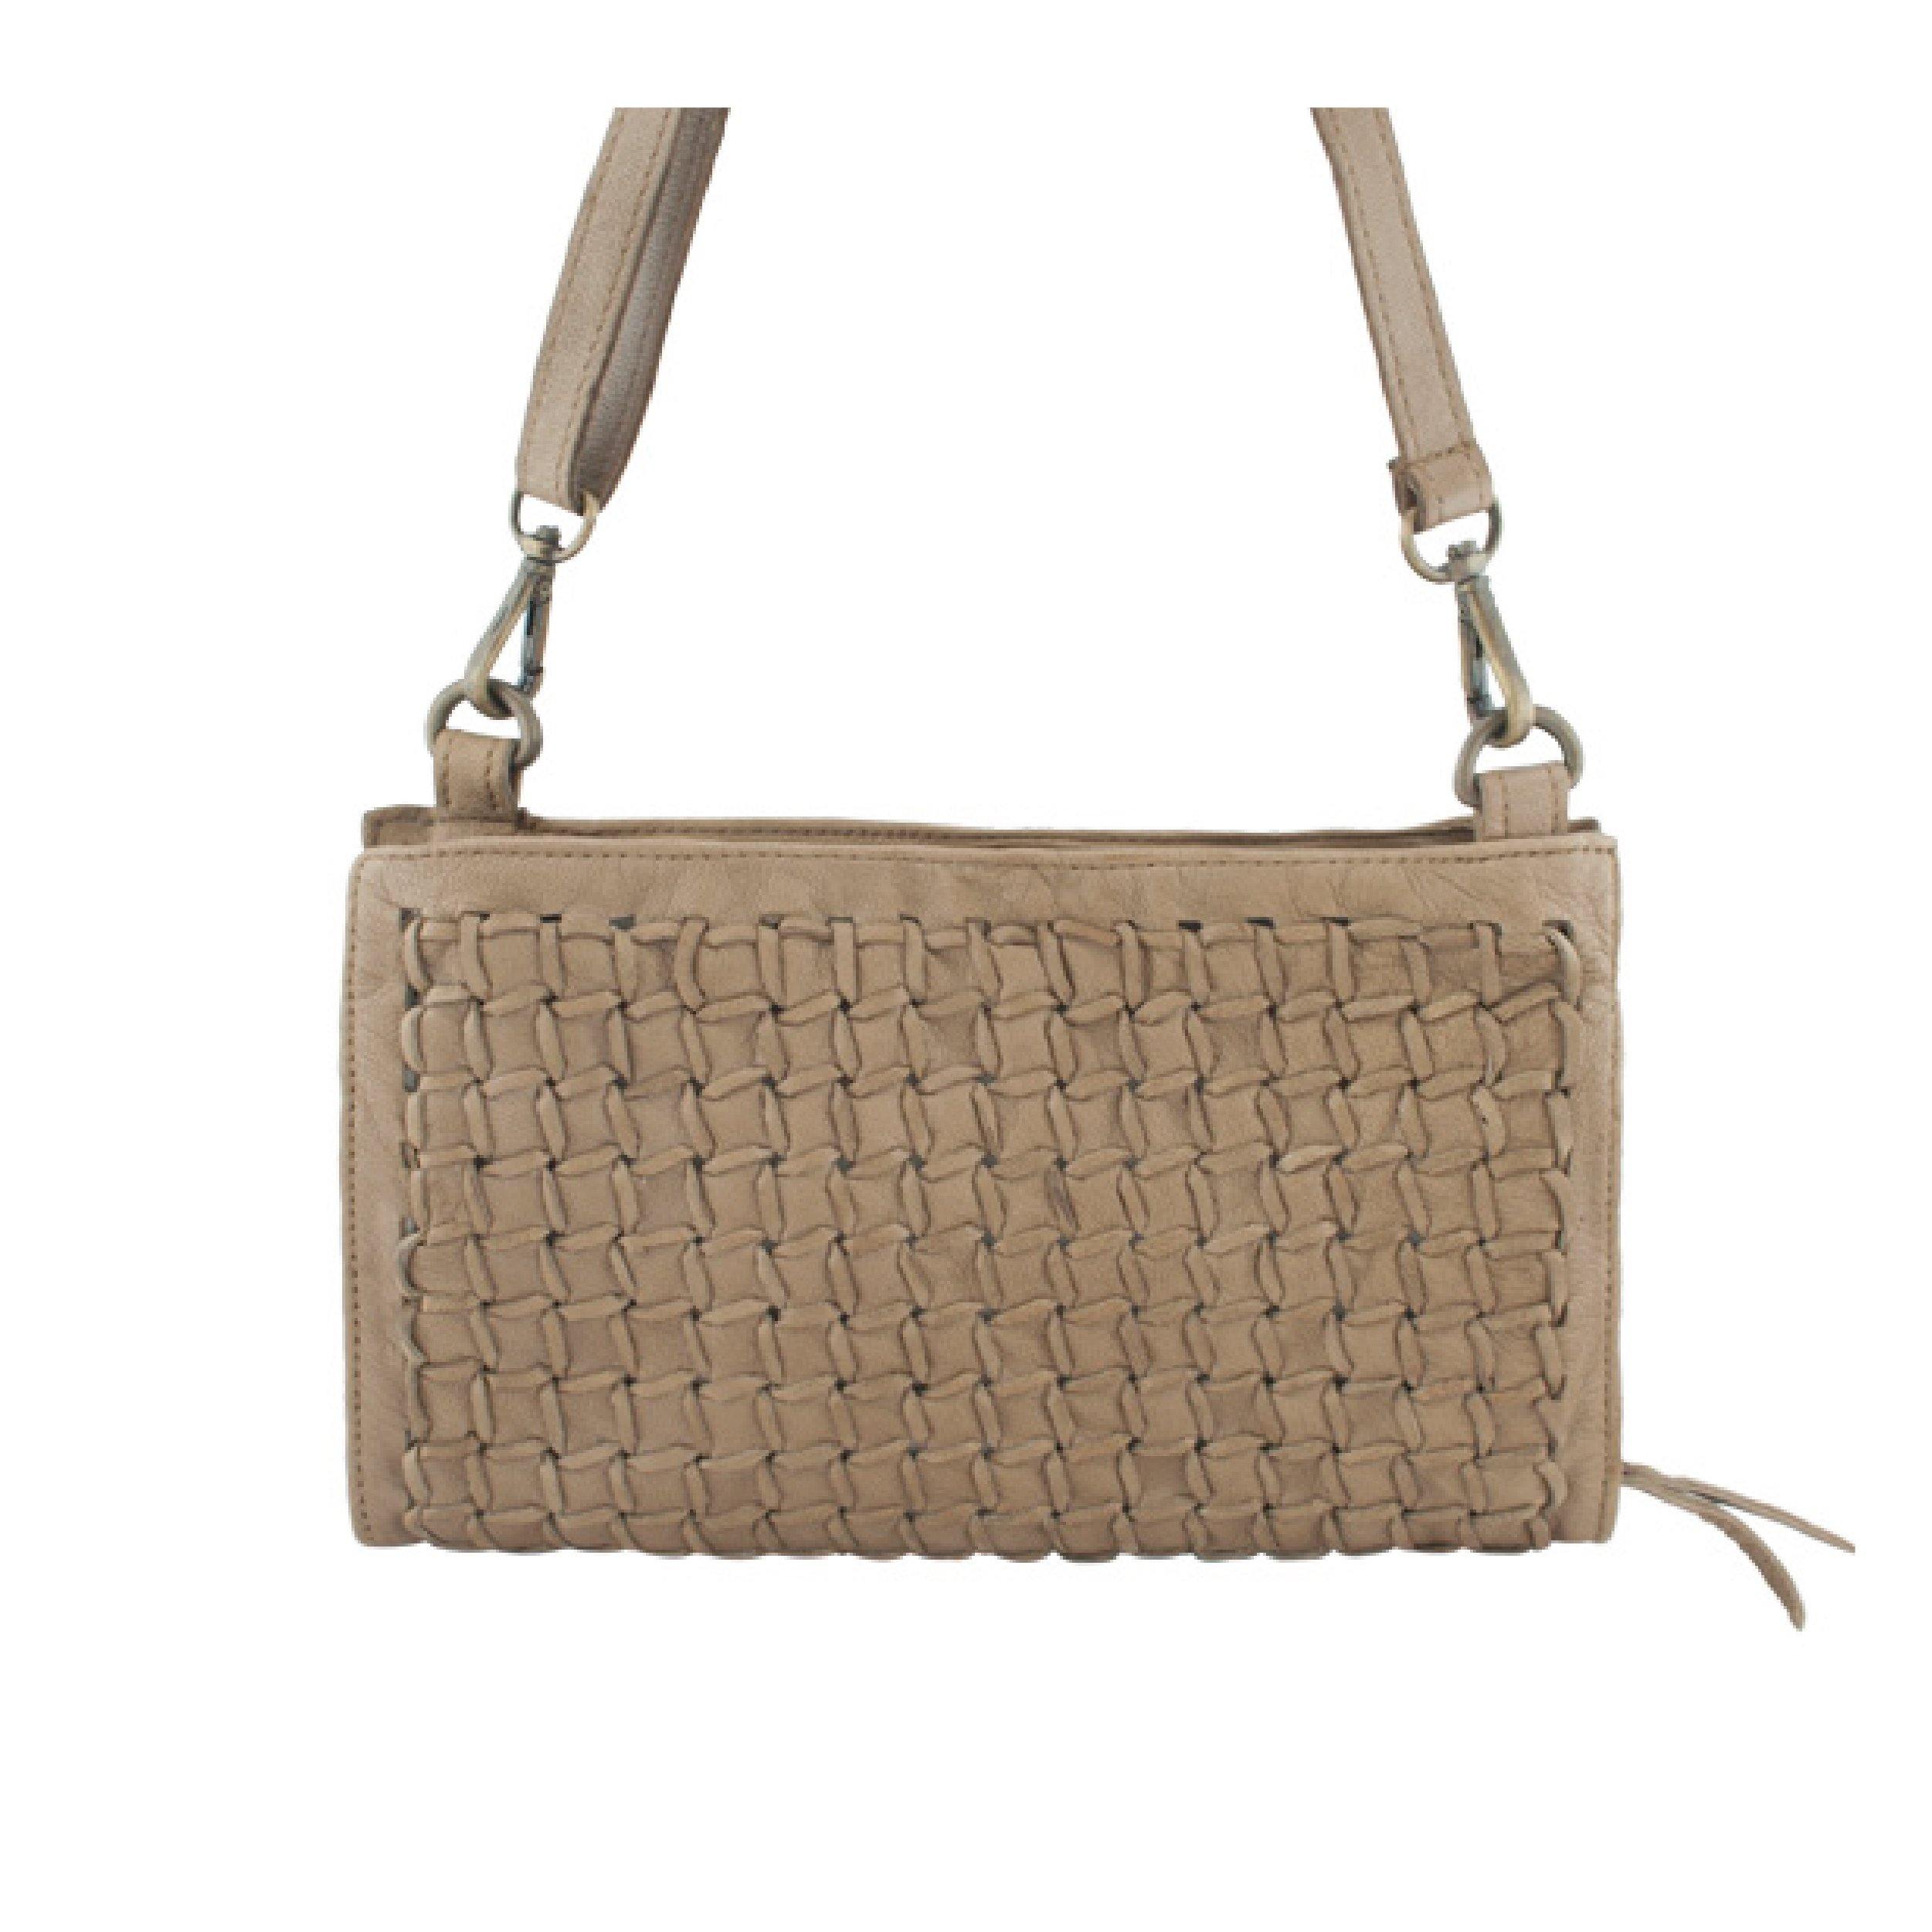 Leather Handbag Bianca Mini Crossbody Bag Taupe Picture 1 regular from Cadelle Leather